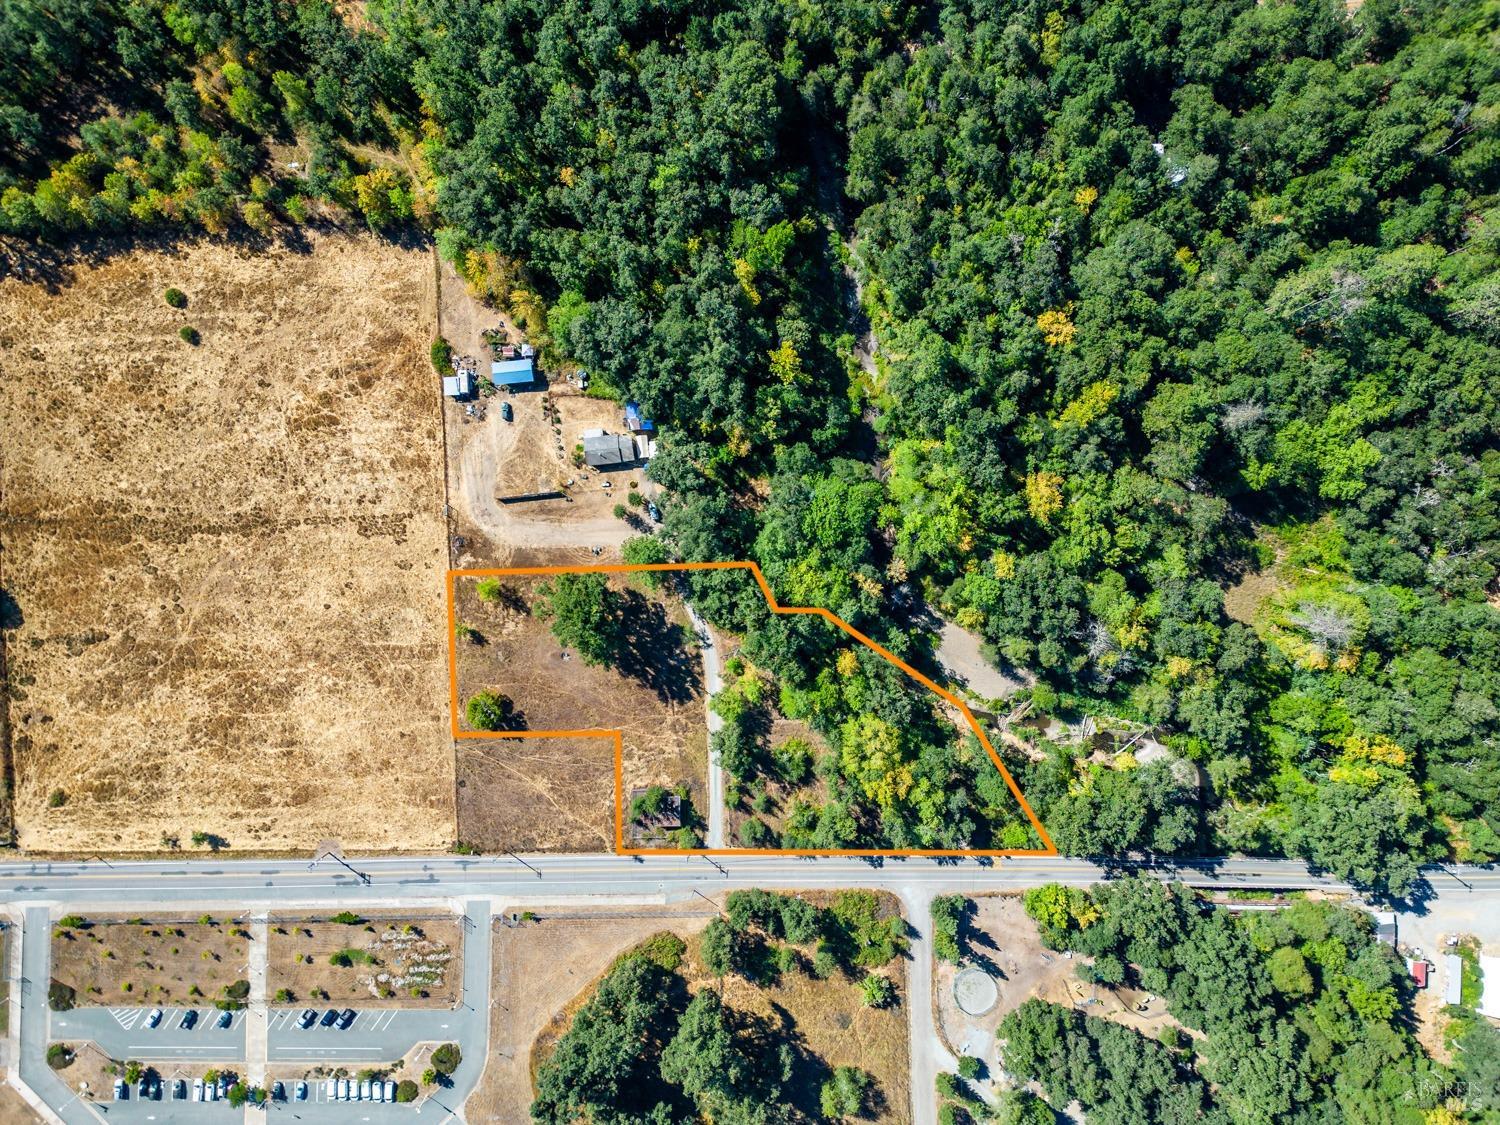 Photo of 325-335 Branscomb Rd in Laytonville, CA